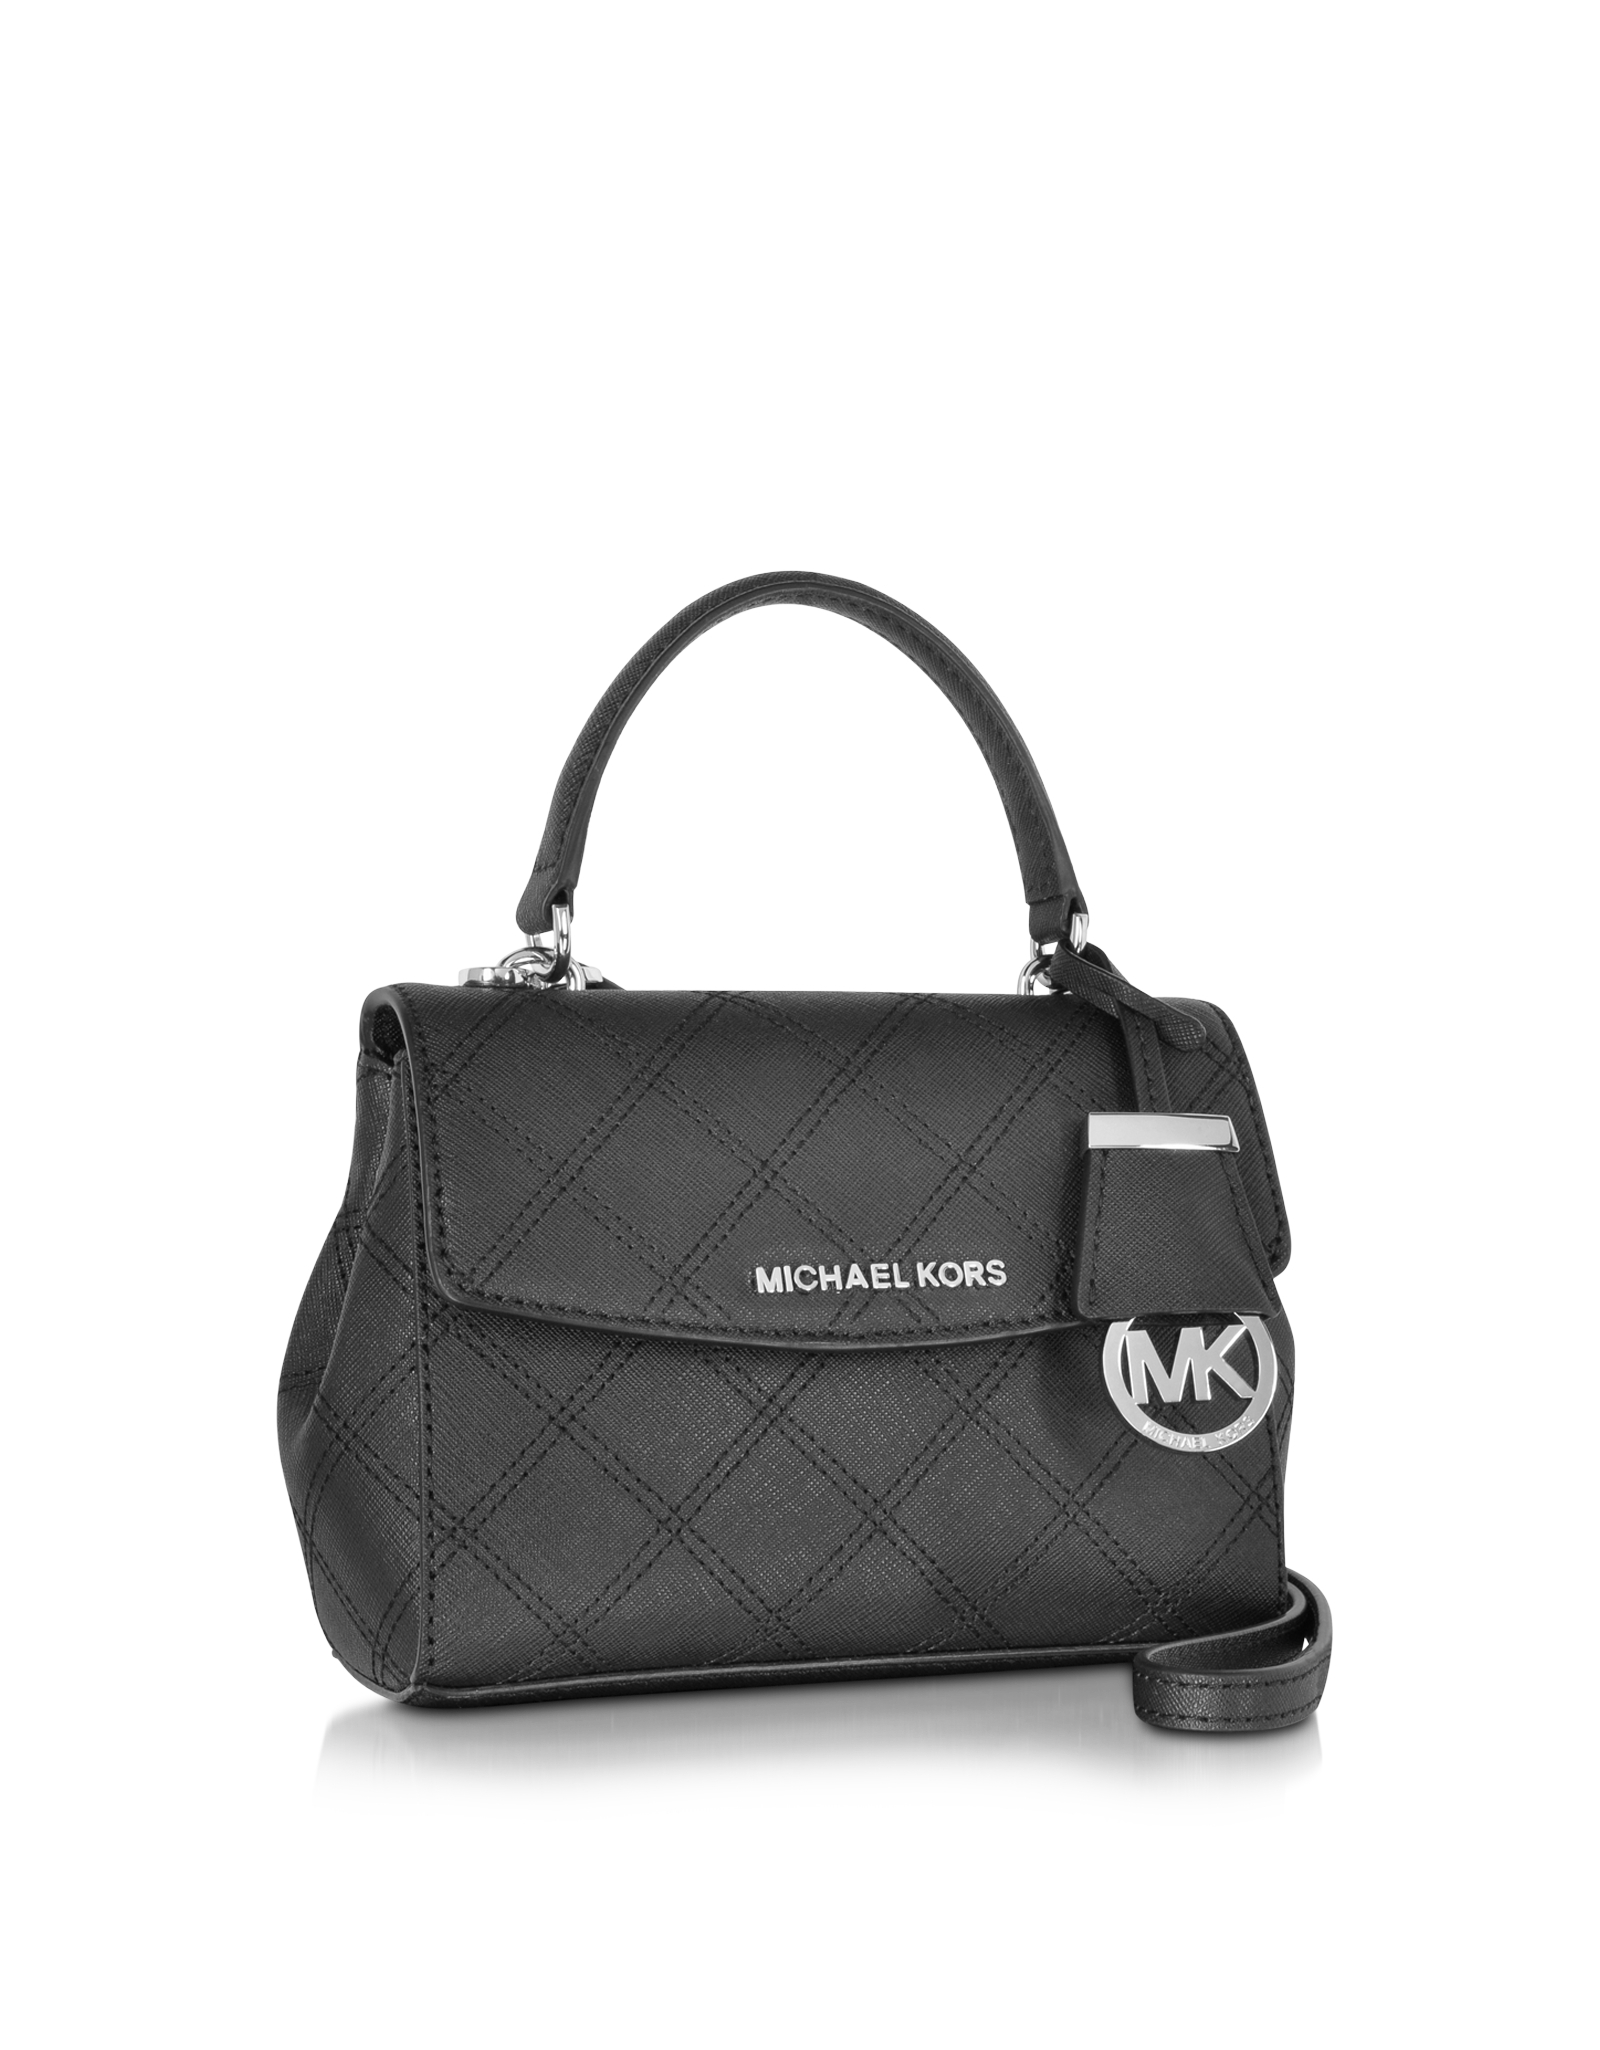 Lyst - Michael Kors Ava Saffiano Stitch Quilt Leather Extra Small Crossbody Bag in Black